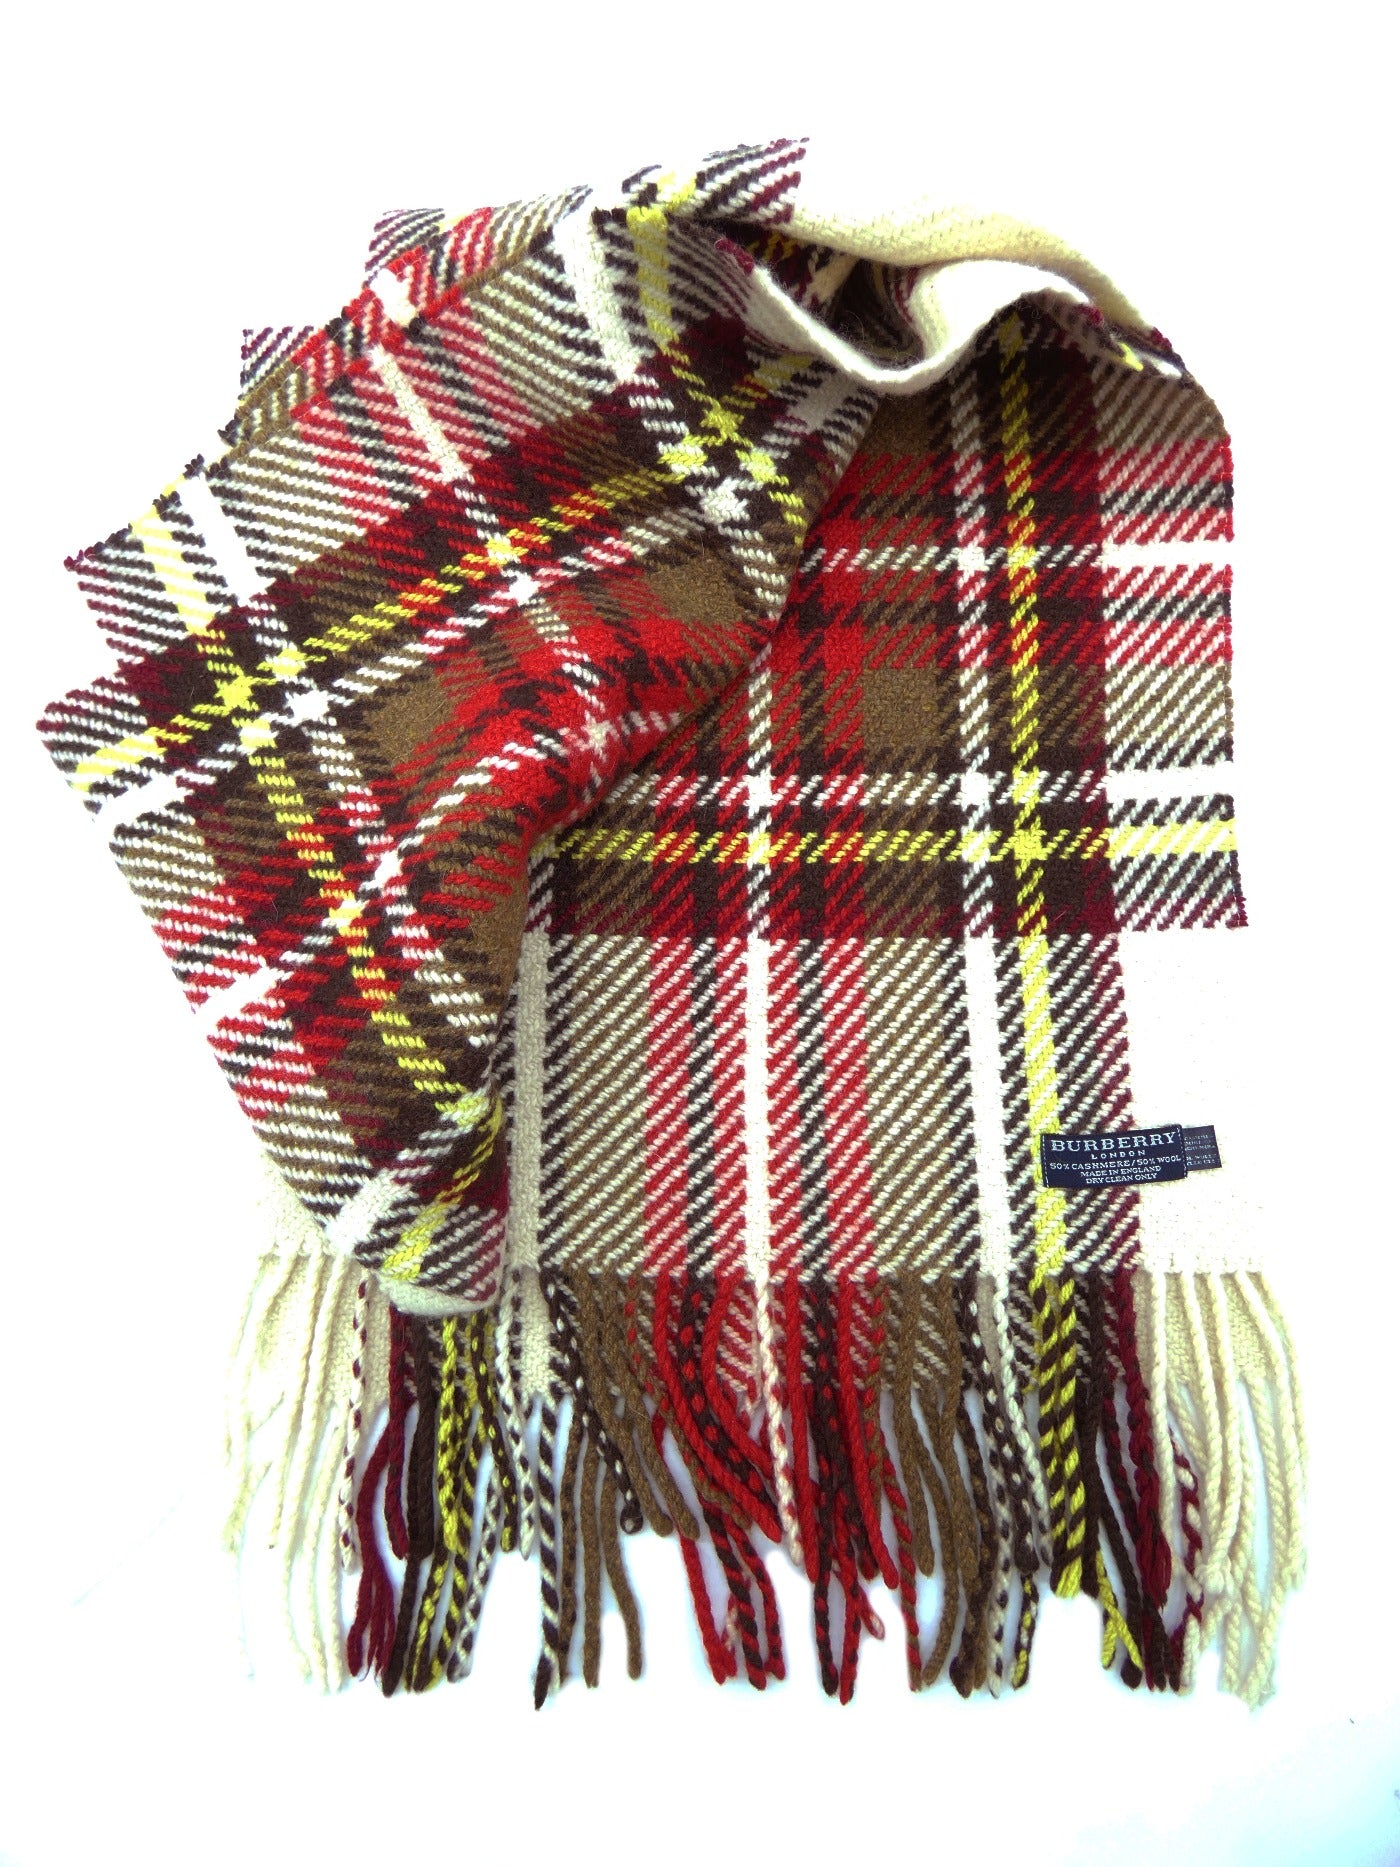 Burberry Cashmere and Wool Giant Multi-Colour Plaid Scarf/Shawl Large - 15" x 76" Scarf Burberry